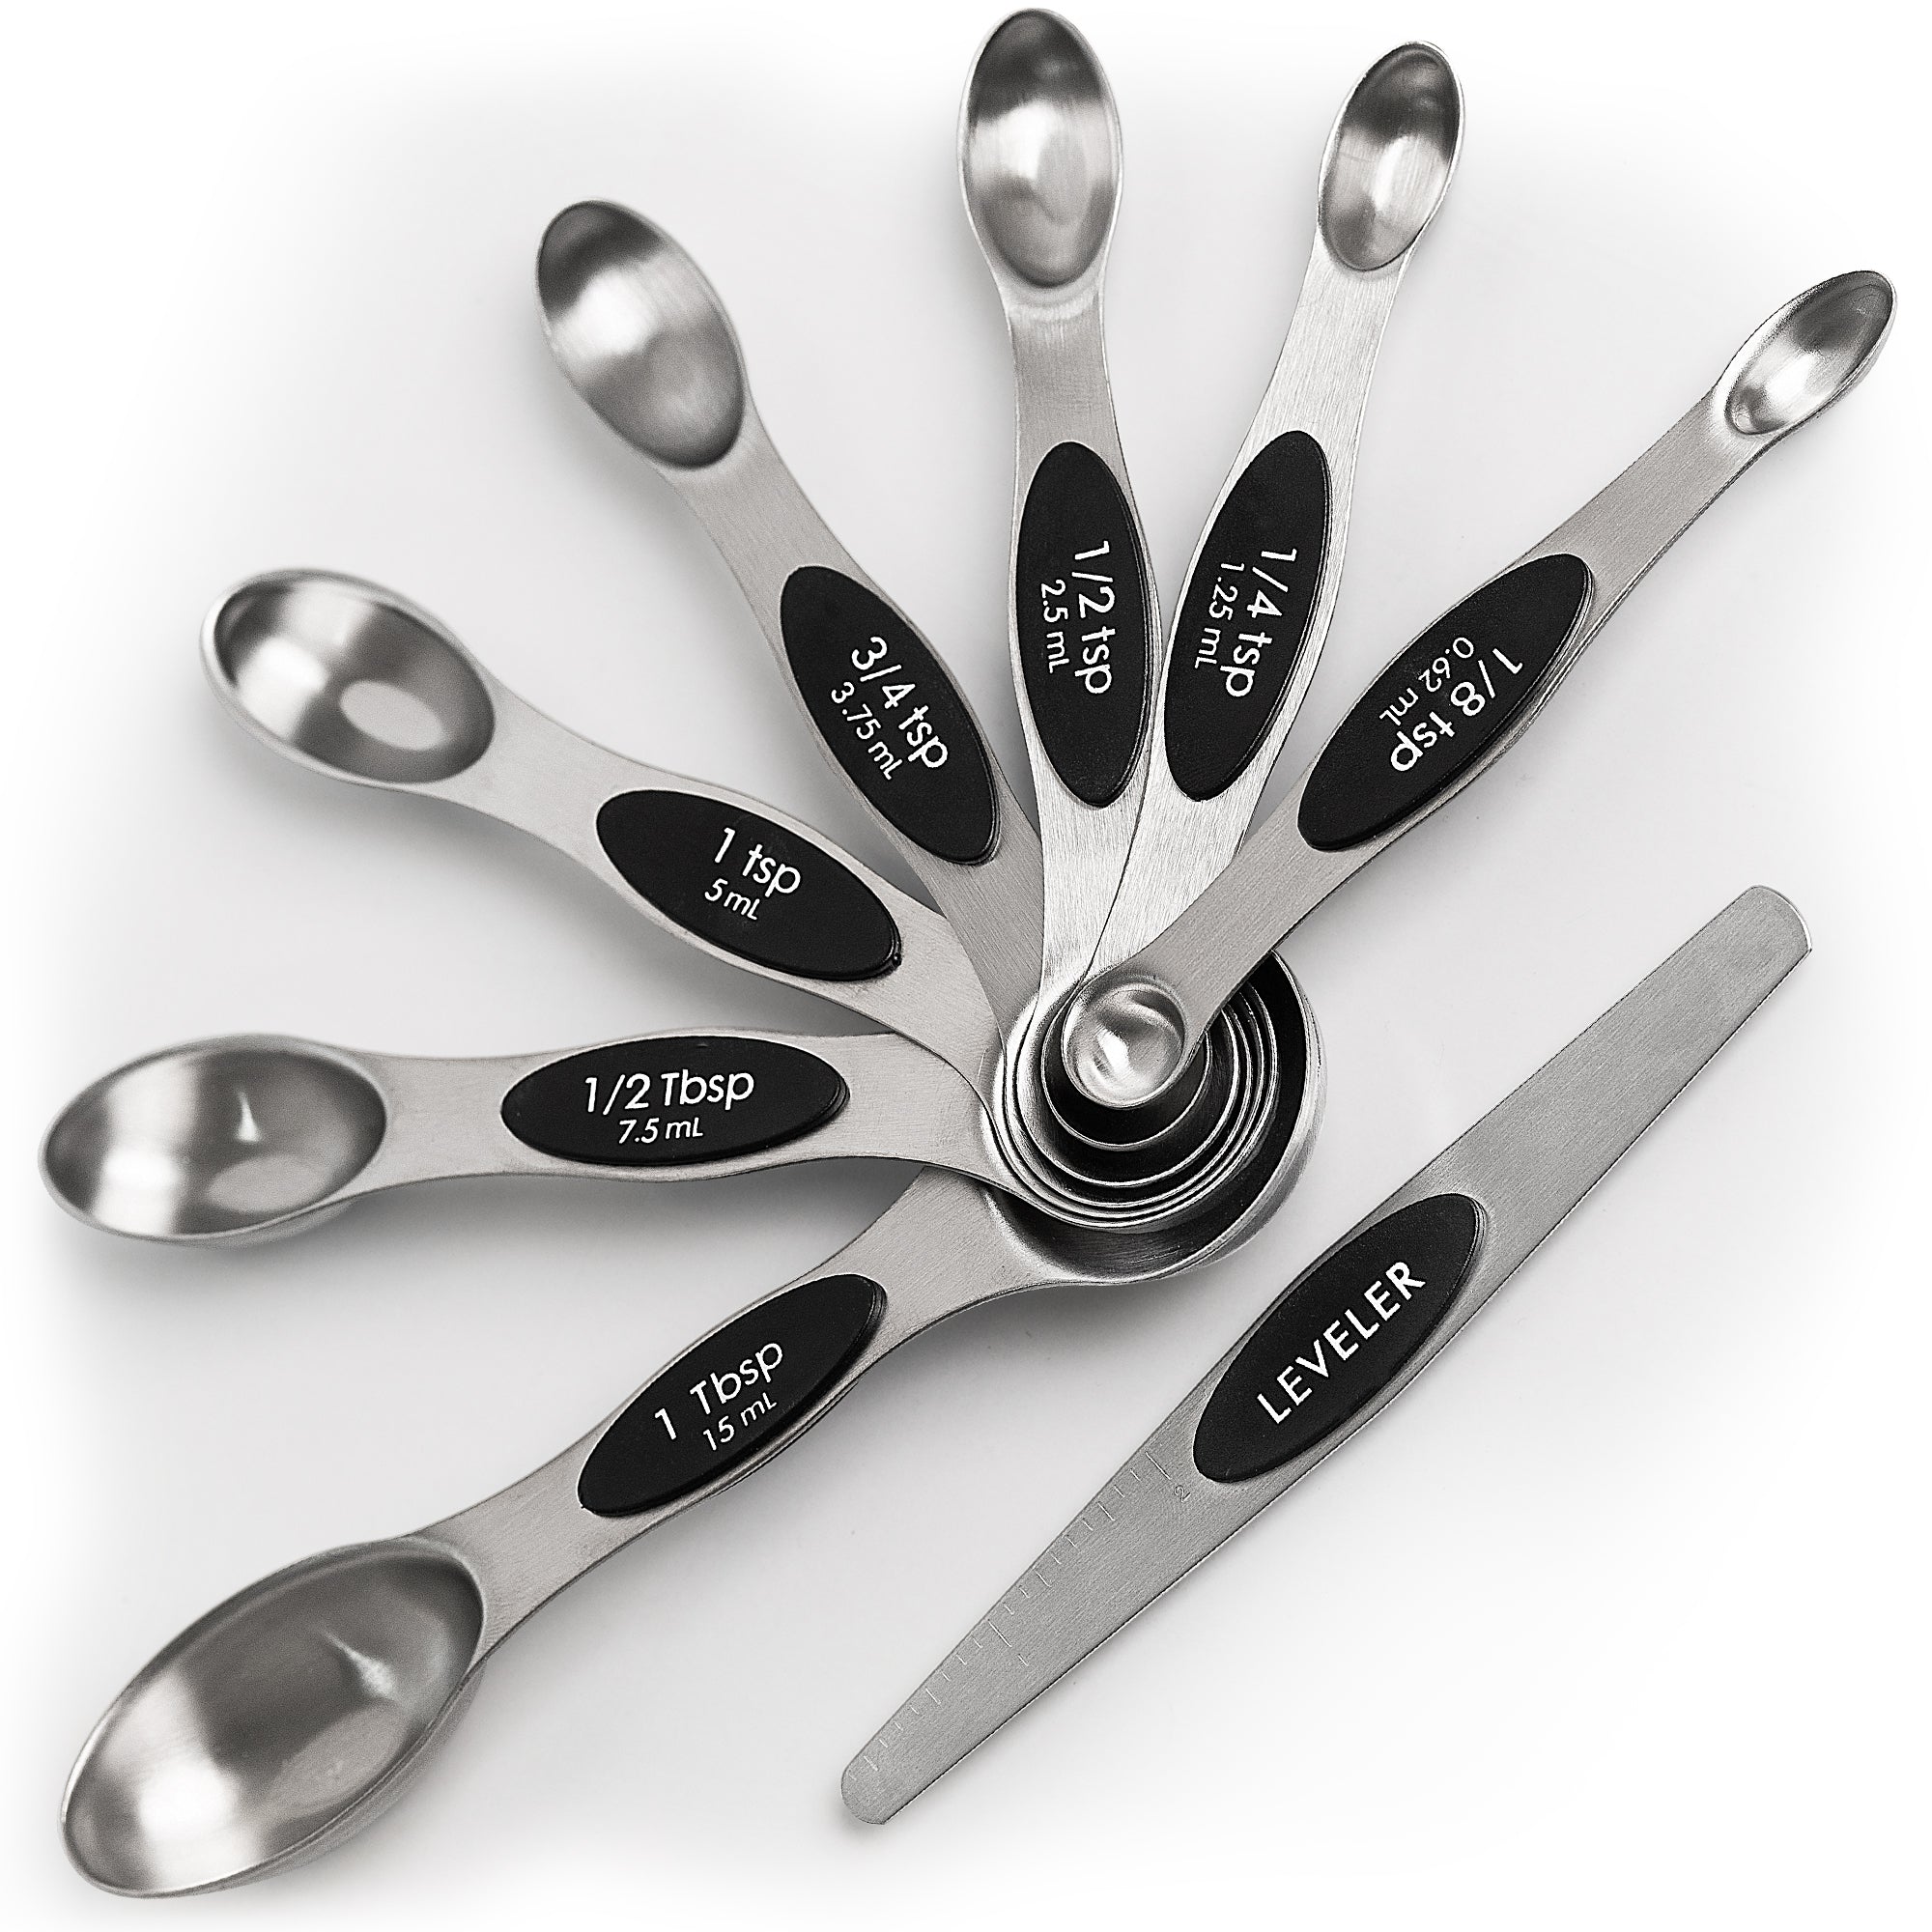 https://www.zulaykitchen.com/cdn/shop/products/magnetic-measuring-spoons-with-levelermagnetic-measuring-spoons-with-levelerzulay-kitchen-clearwaterzulay-kitchenz-mgntc-2side-msrng-spn-250459.jpg?v=1684848514